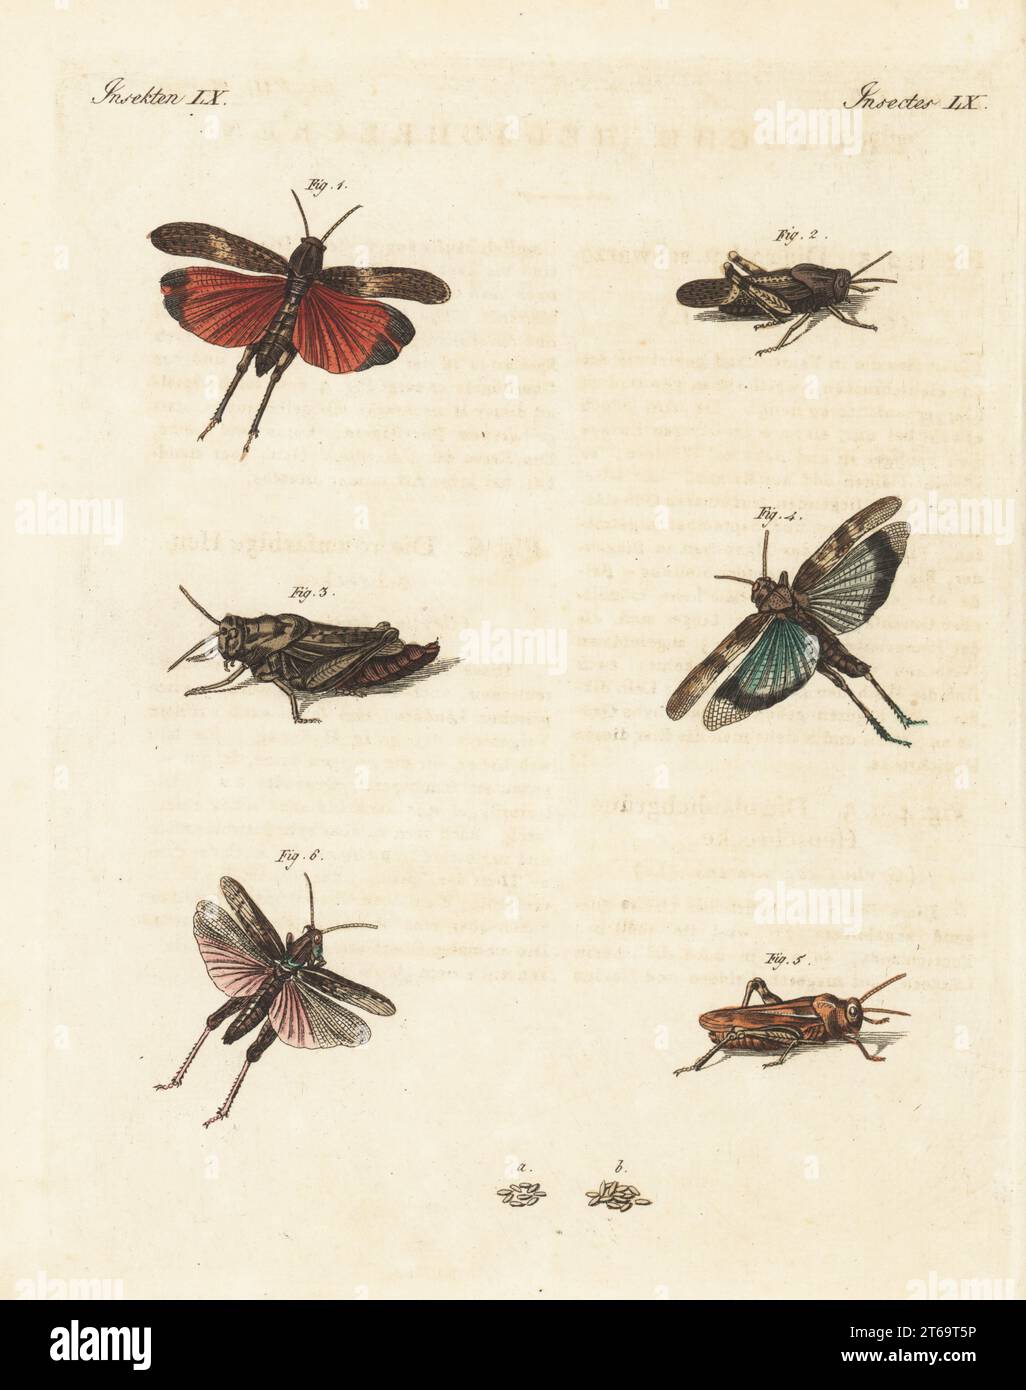 Rattle grasshopper, Psophus stridulus 1-3, blue-winged grasshopper, Oedipoda caerulescens 4,5, and Italian locust, Calliptamus italicus 6. Handcoloured copperplate engraving from Carl Bertuch's Bilderbuch fur Kinder (Picture Book for Children), Weimar, 1810. A 12-volume encyclopedia for children illustrated with almost 1,200 engraved plates on natural history, science, costume, mythology, etc., published from 1790-1830. Stock Photo